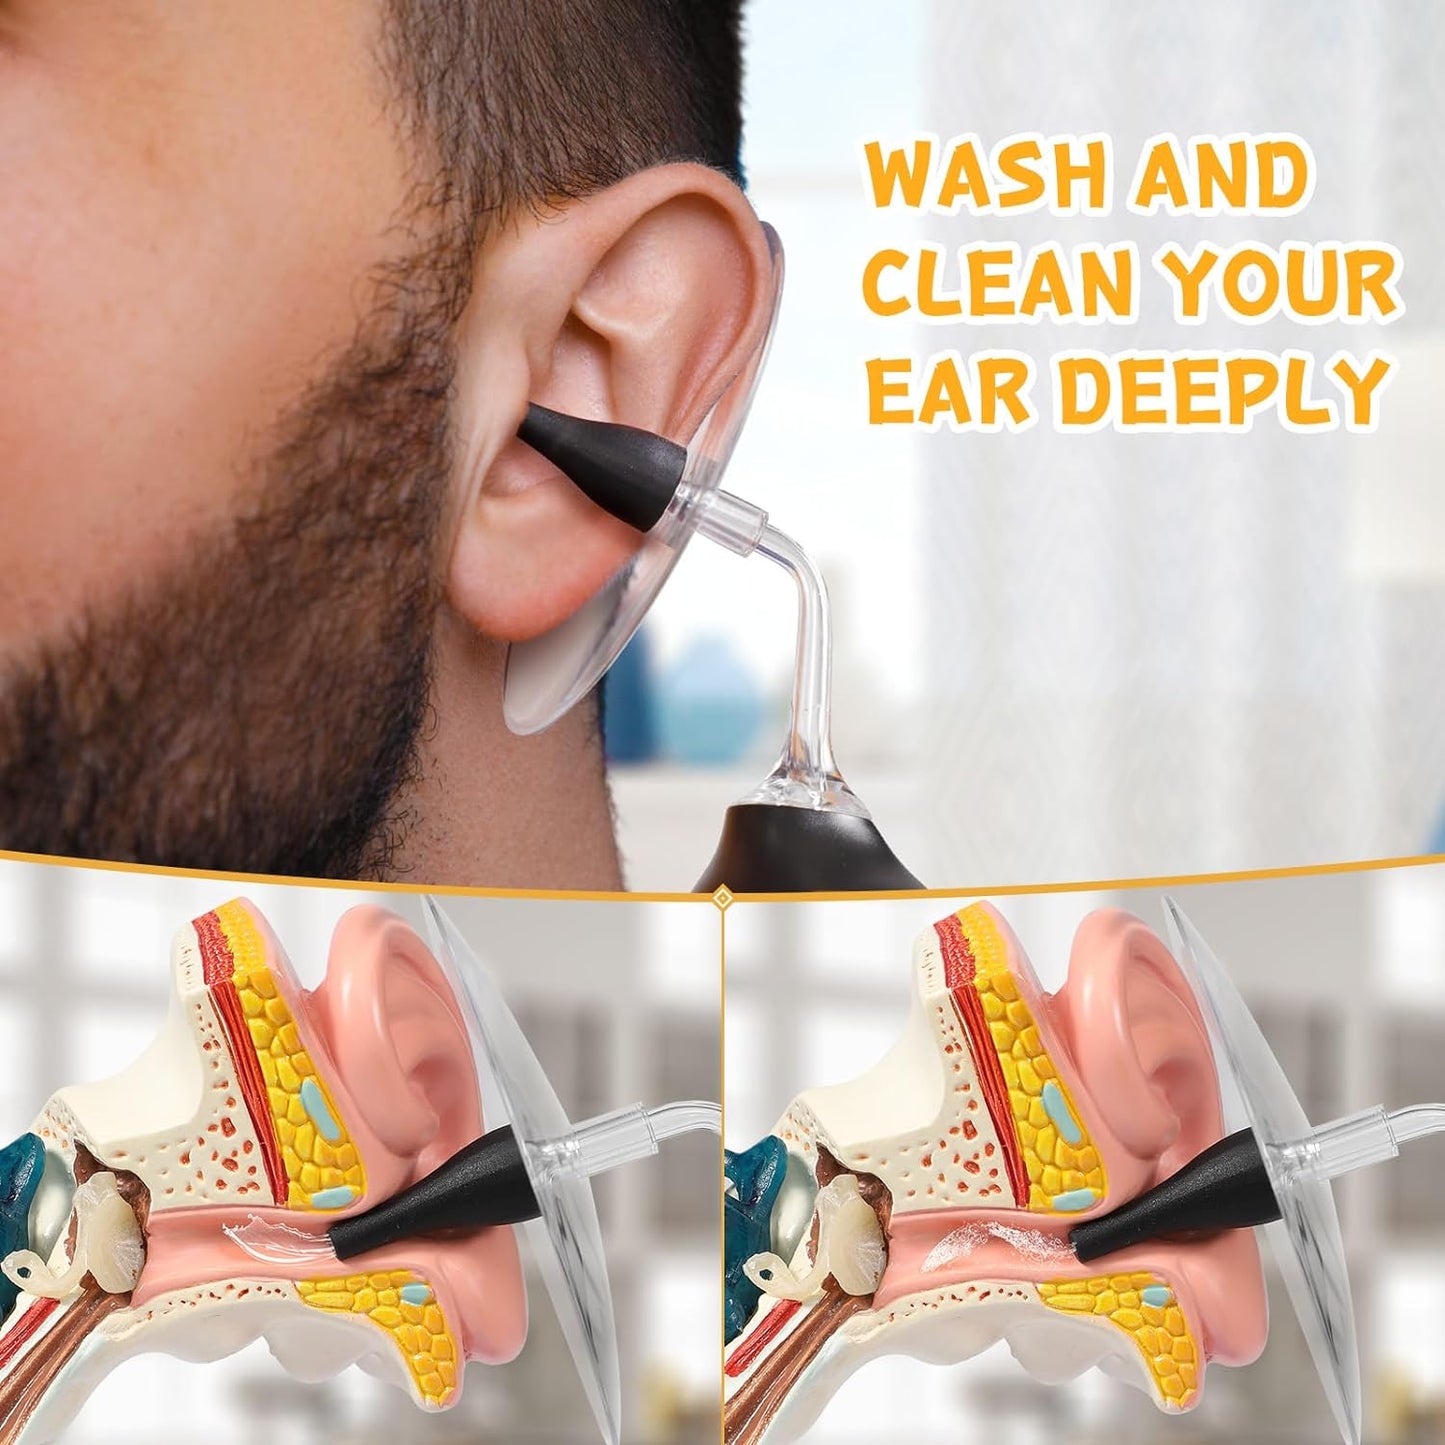 HwaEyem Electric Ear Wax Removal Cleaner, Electric Irrigation Flushing System with 3 Cleaning Modes 1 DIY Mode, Customizing Water Pressure and Speed